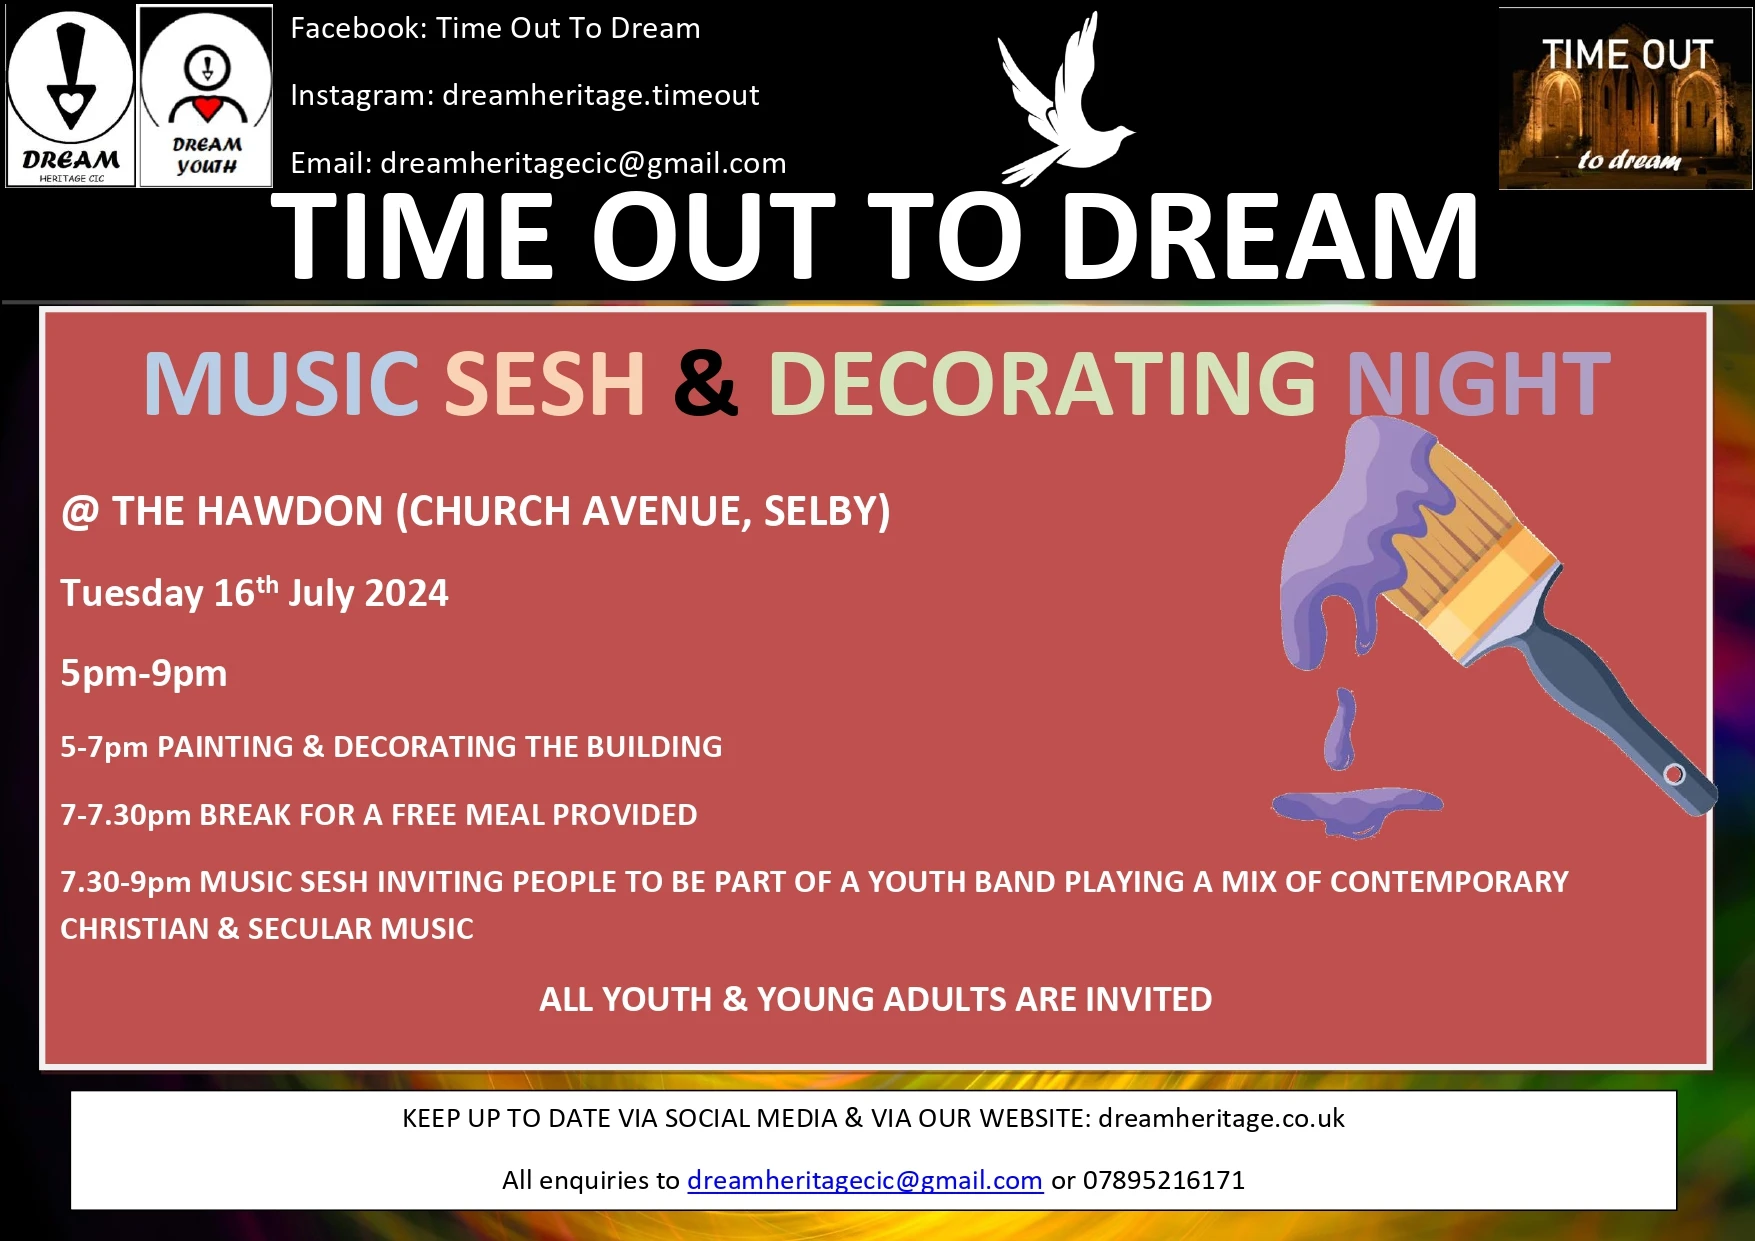 921-16th-july-24-music-sesh-and-painting-time-out-to-dreampage-0001-17206095208232.jpg